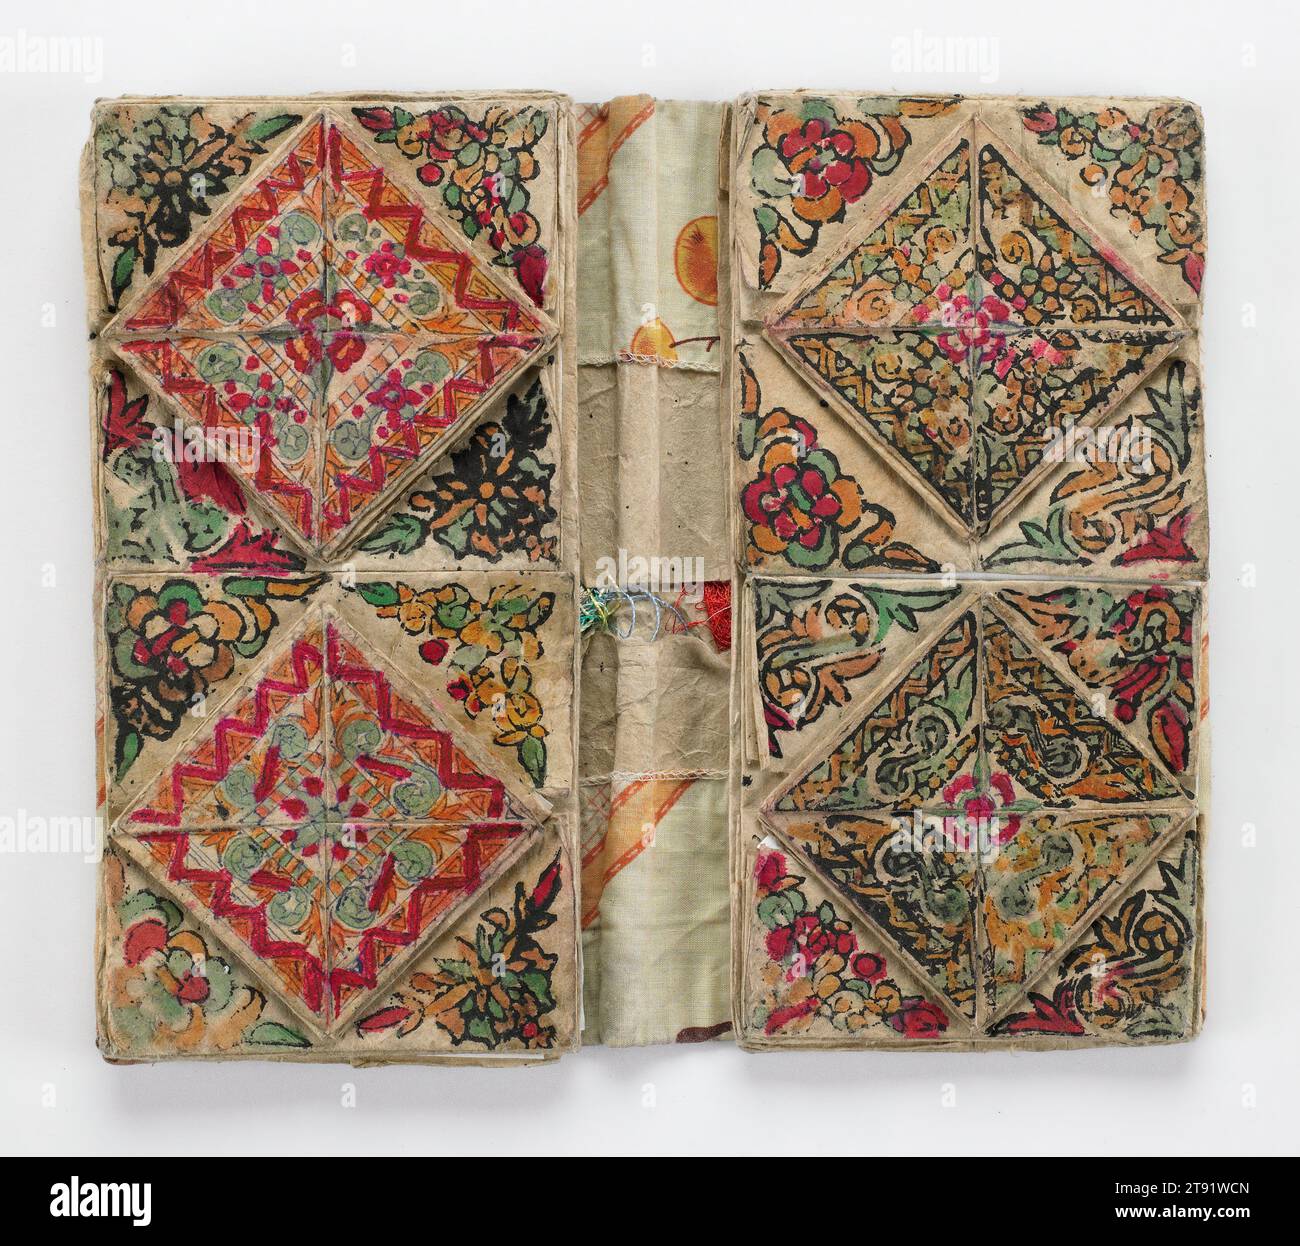 Embroidery and Thread Case, 9 7/8 x 6 x 1 1/4 in. (25.08 x 15.24 x 3.18 cm) (closed), Cotton fabric, paper, pigment, China Stock Photo